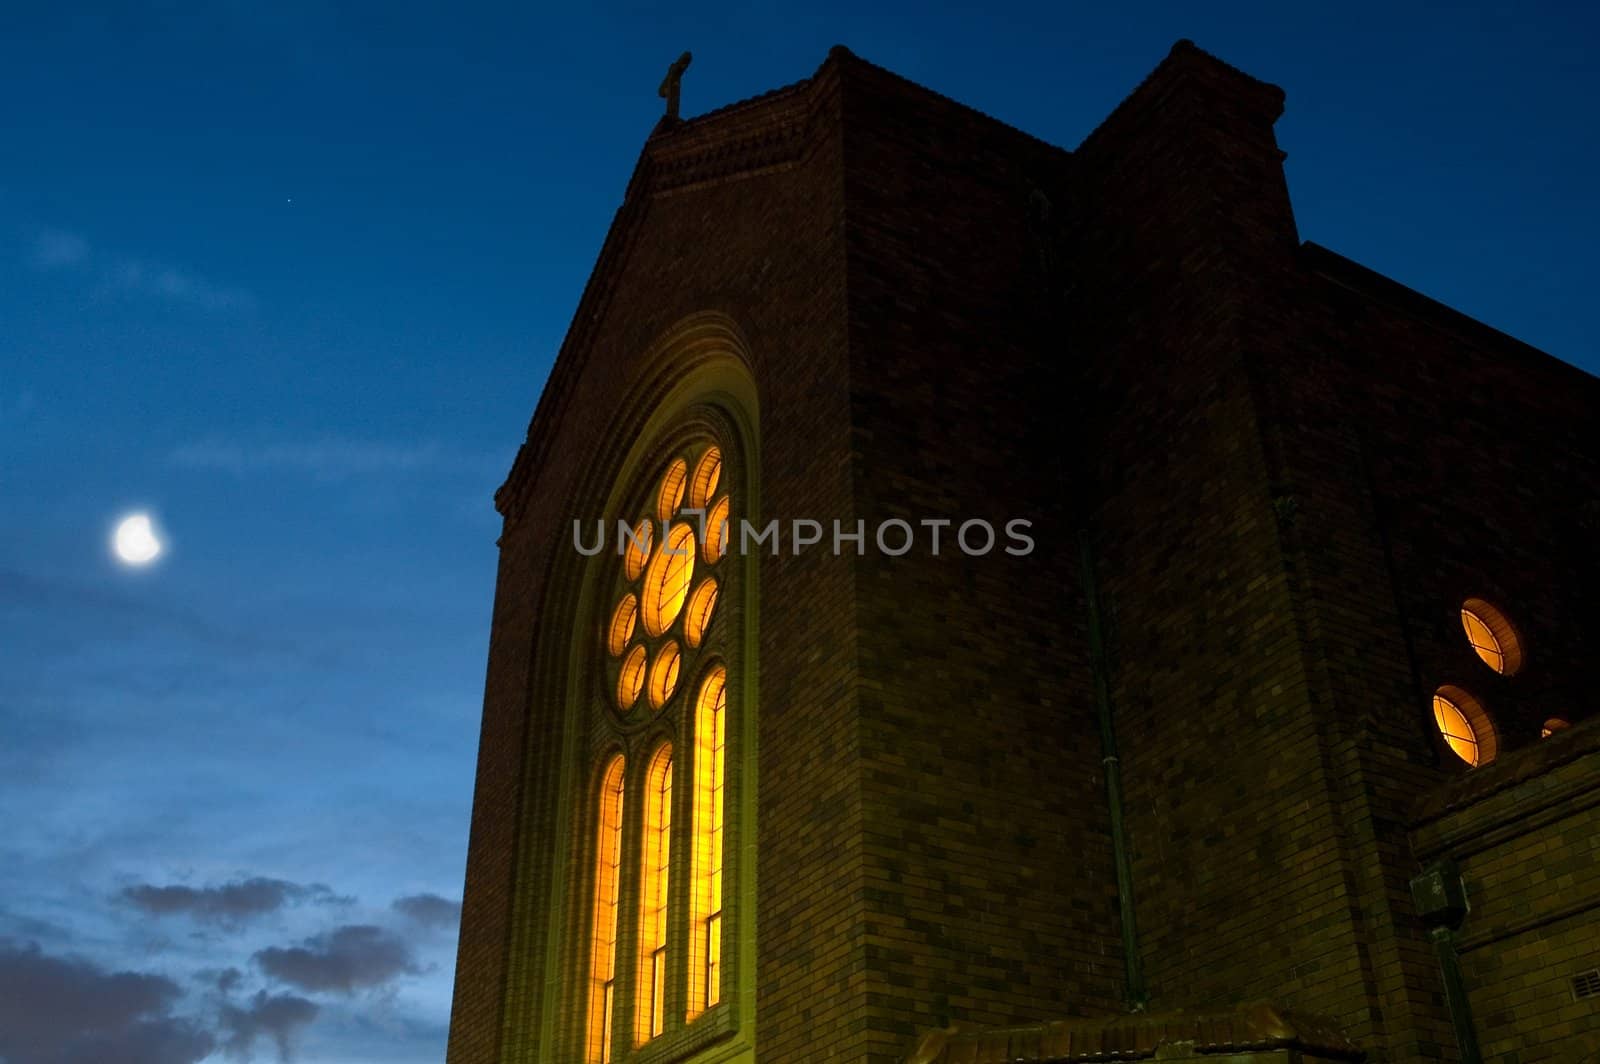 church in sydney at night, illuminated from inside, moon in background